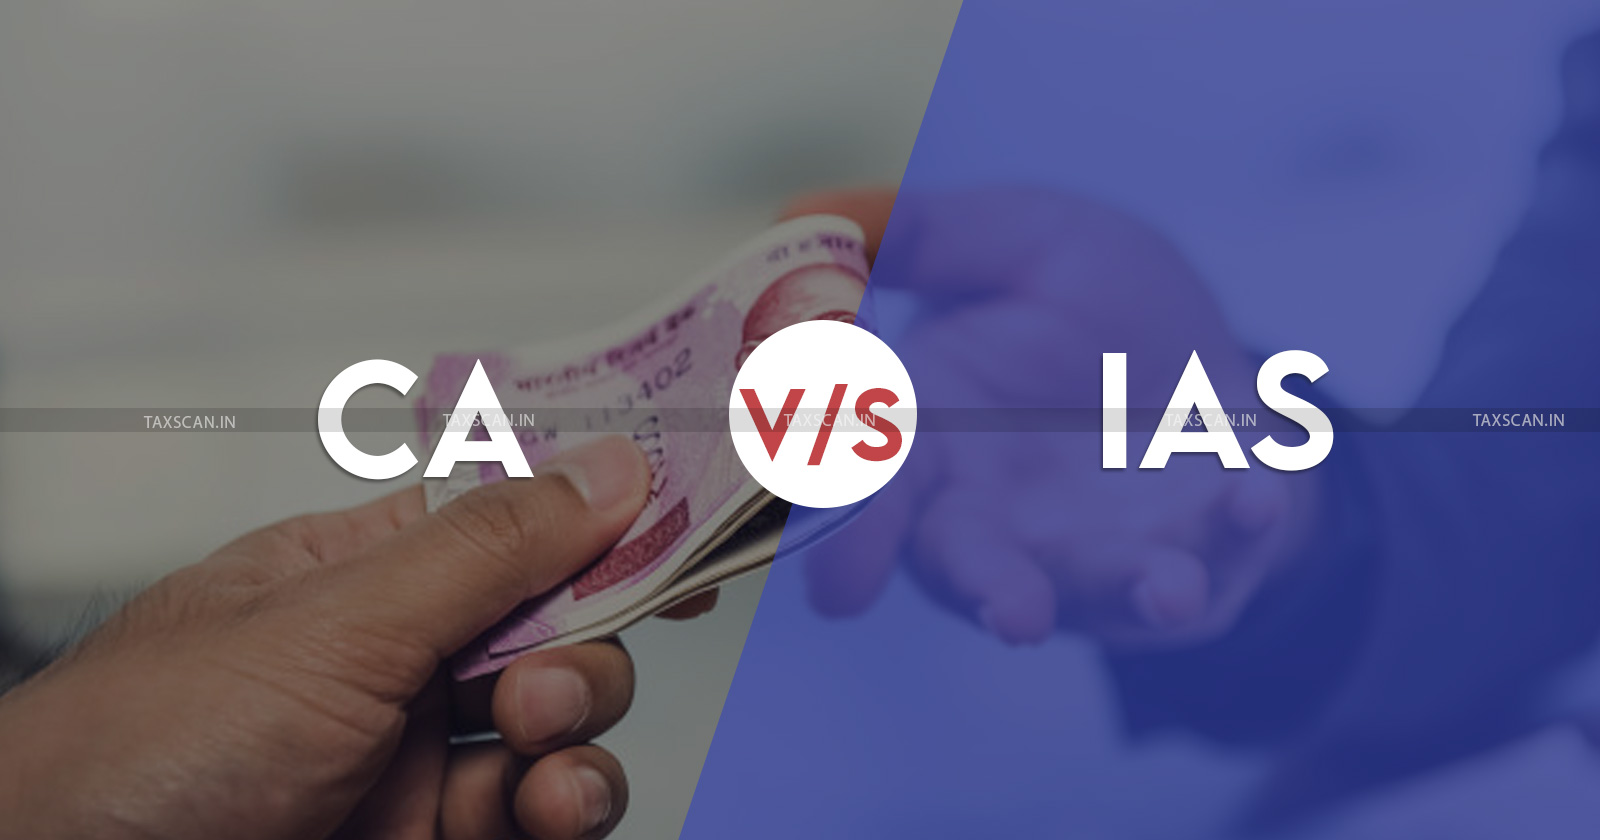 people prefer IAS - professions - Chartered Accountant compares - profession - an IAS's salary - taxscan